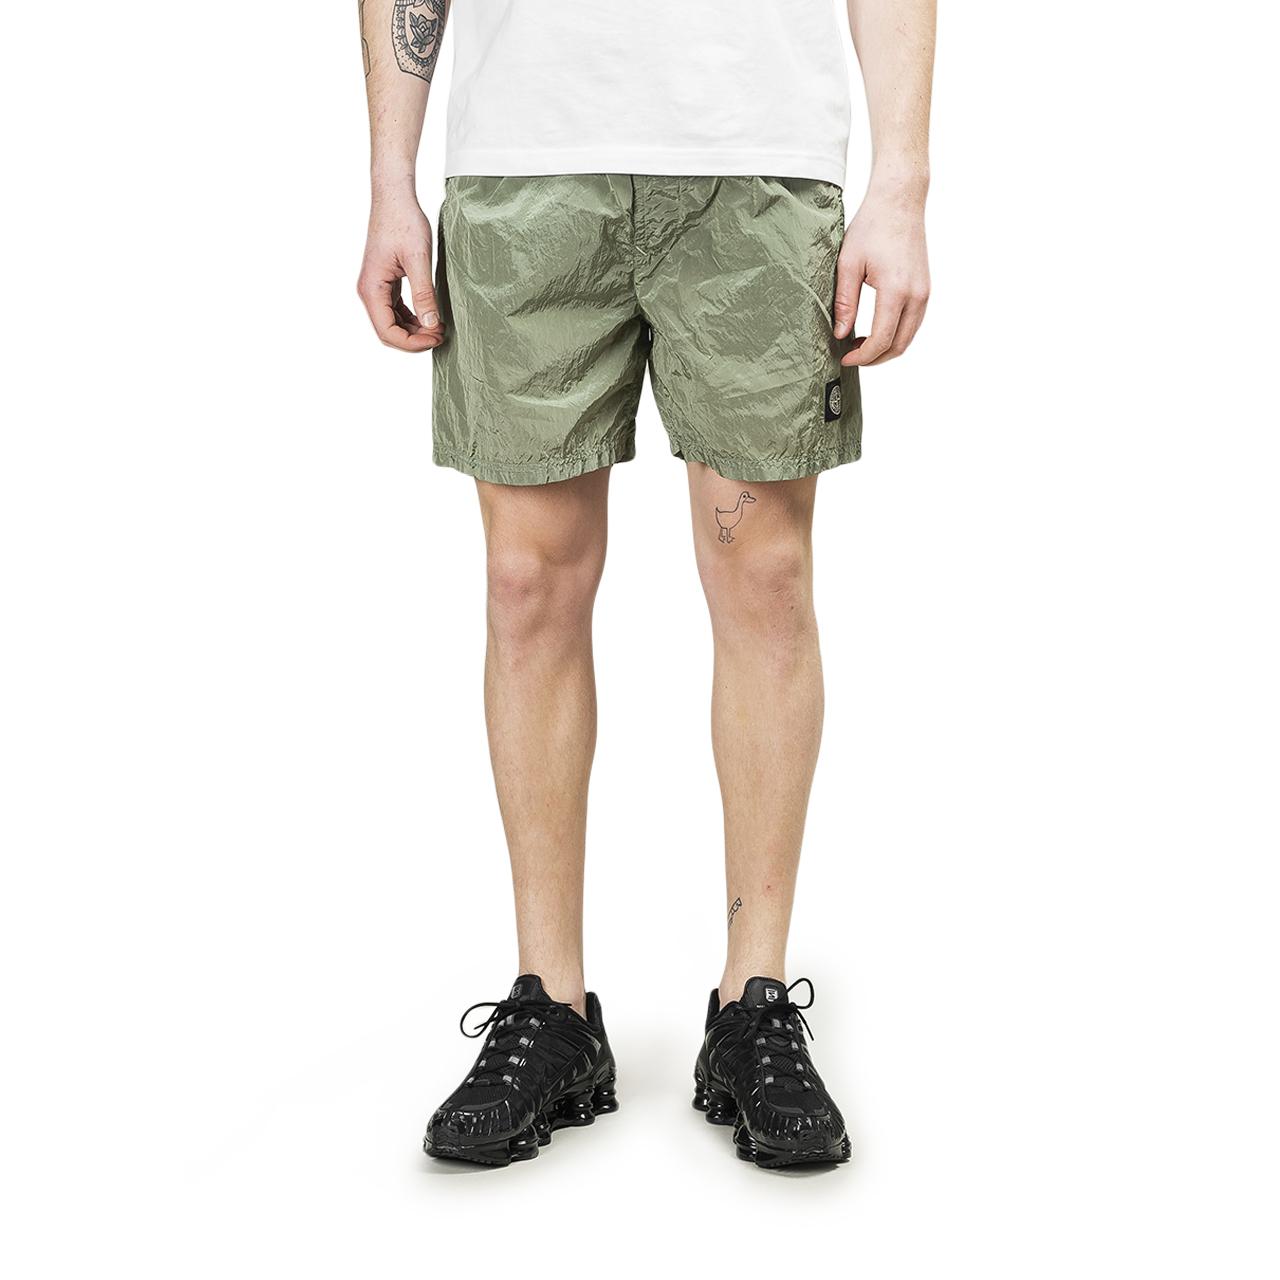 Stone Island Shorts in Green for Men - Lyst